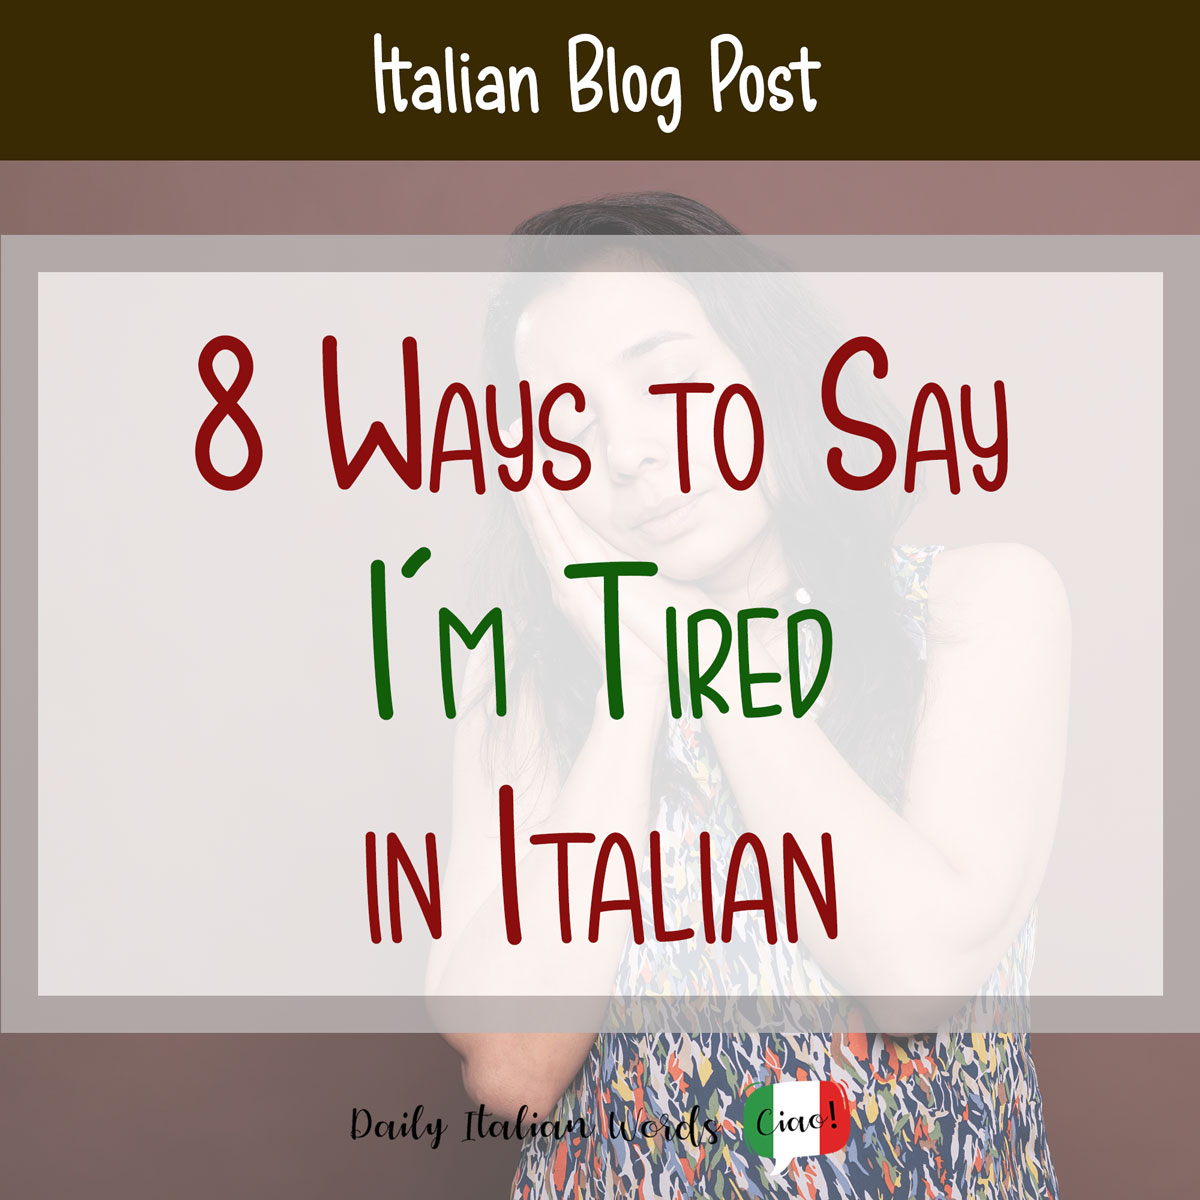 8 Ways to Say “I'm Tired!” in Italian